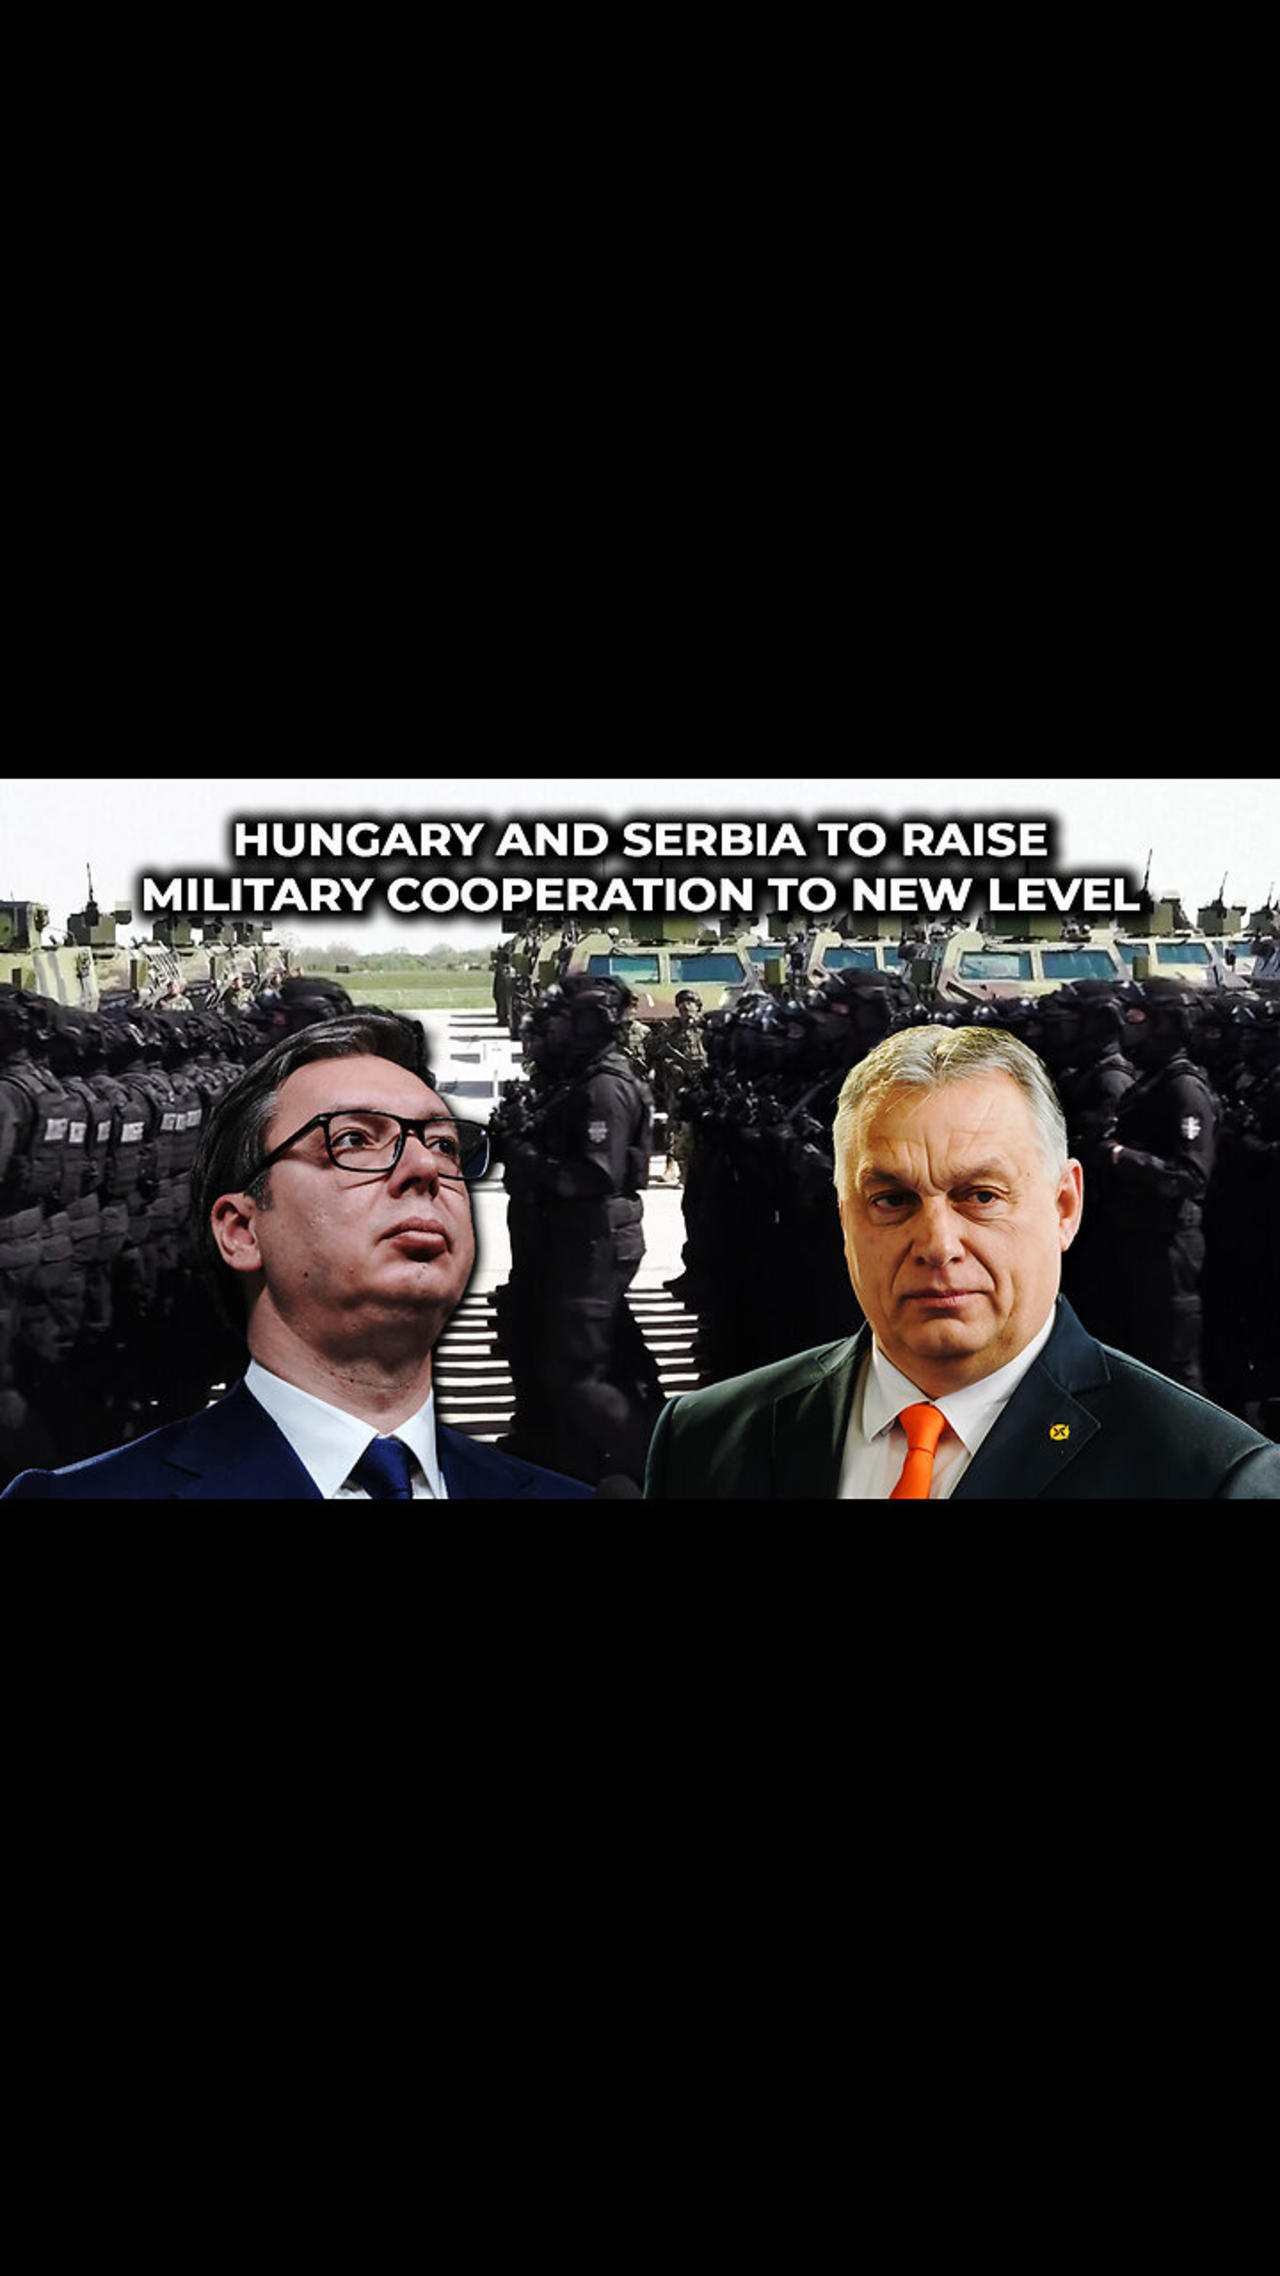 Hungary and Serbia to Raise Military Cooperation to New Level